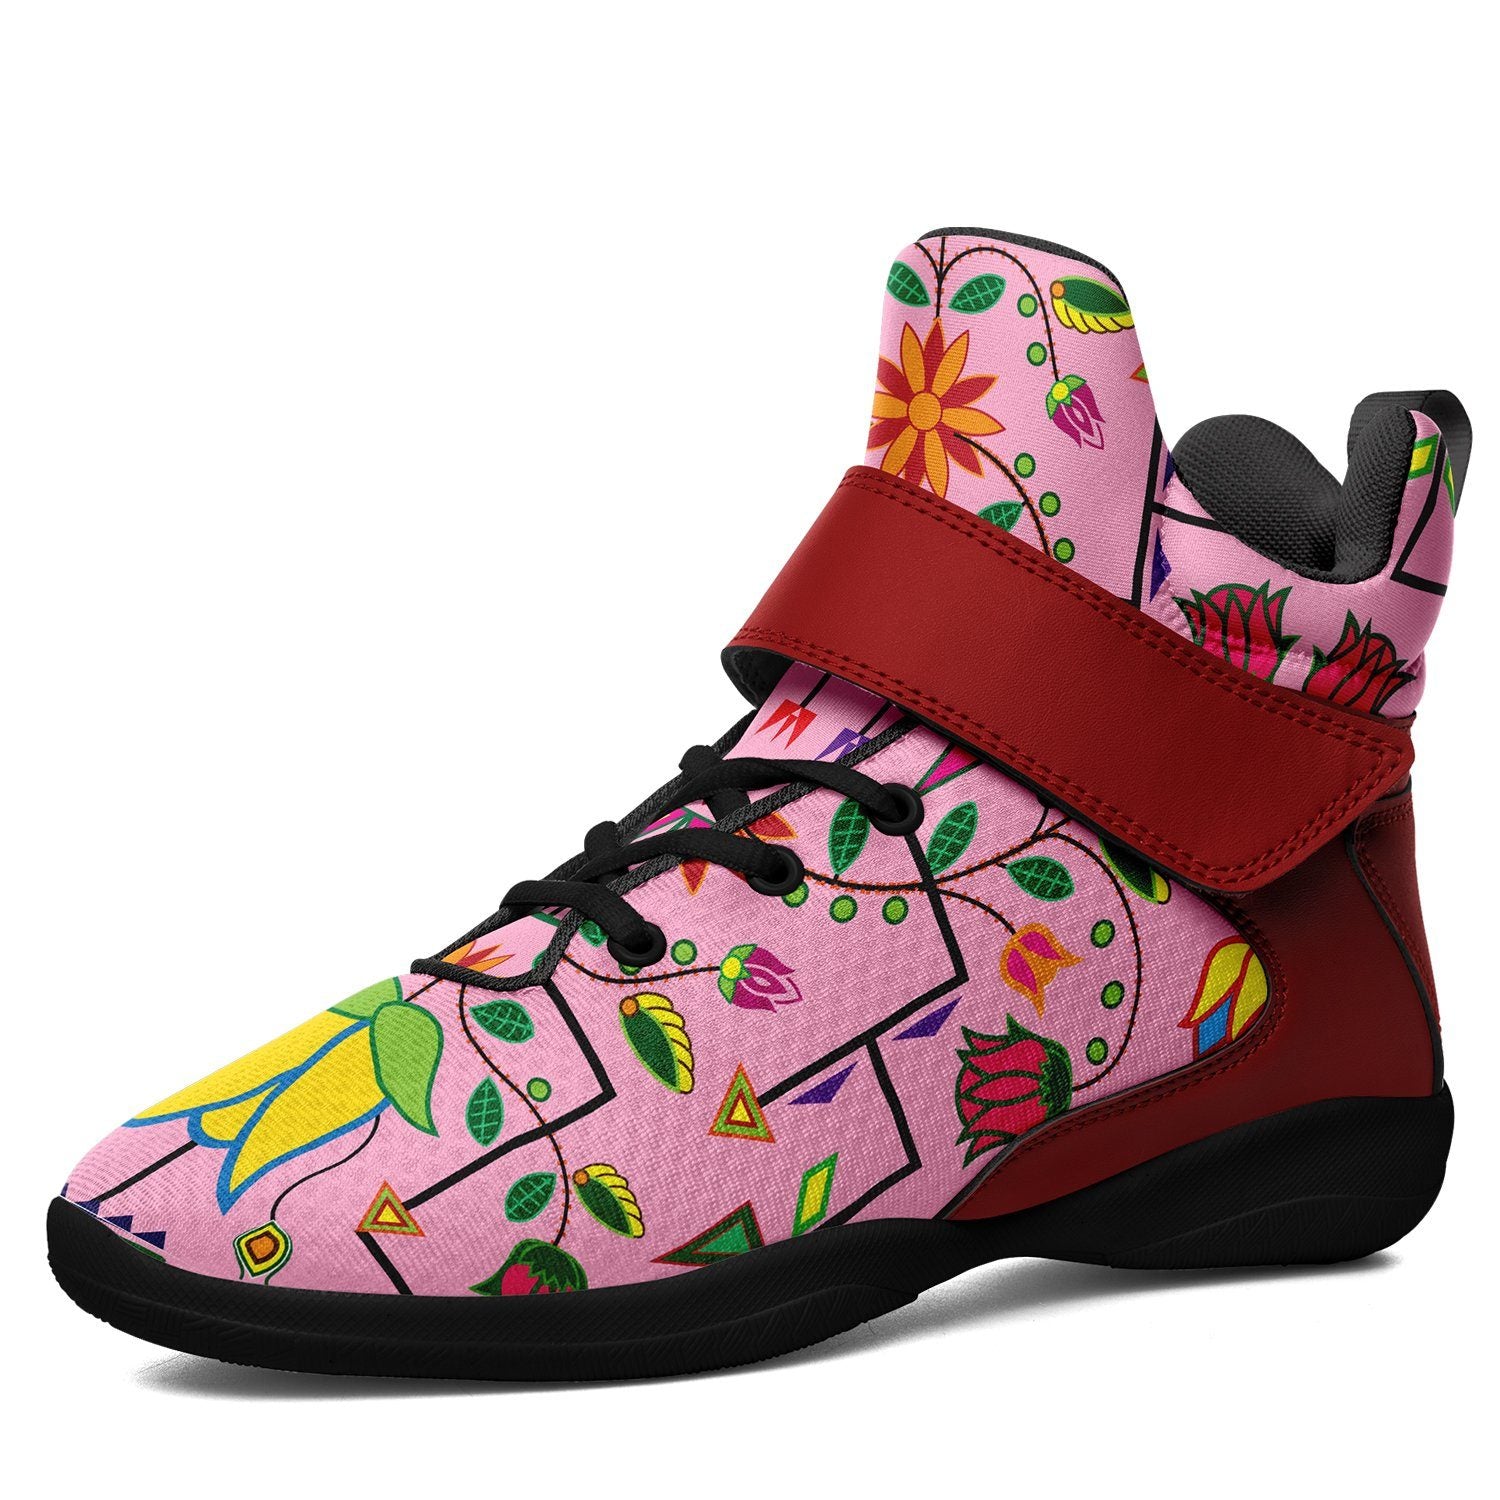 Geometric Floral Summer Sunset Ipottaa Basketball / Sport High Top Shoes 49 Dzine US Women 4.5 / US Youth 3.5 / EUR 35 Black Sole with Dark Red Strap 